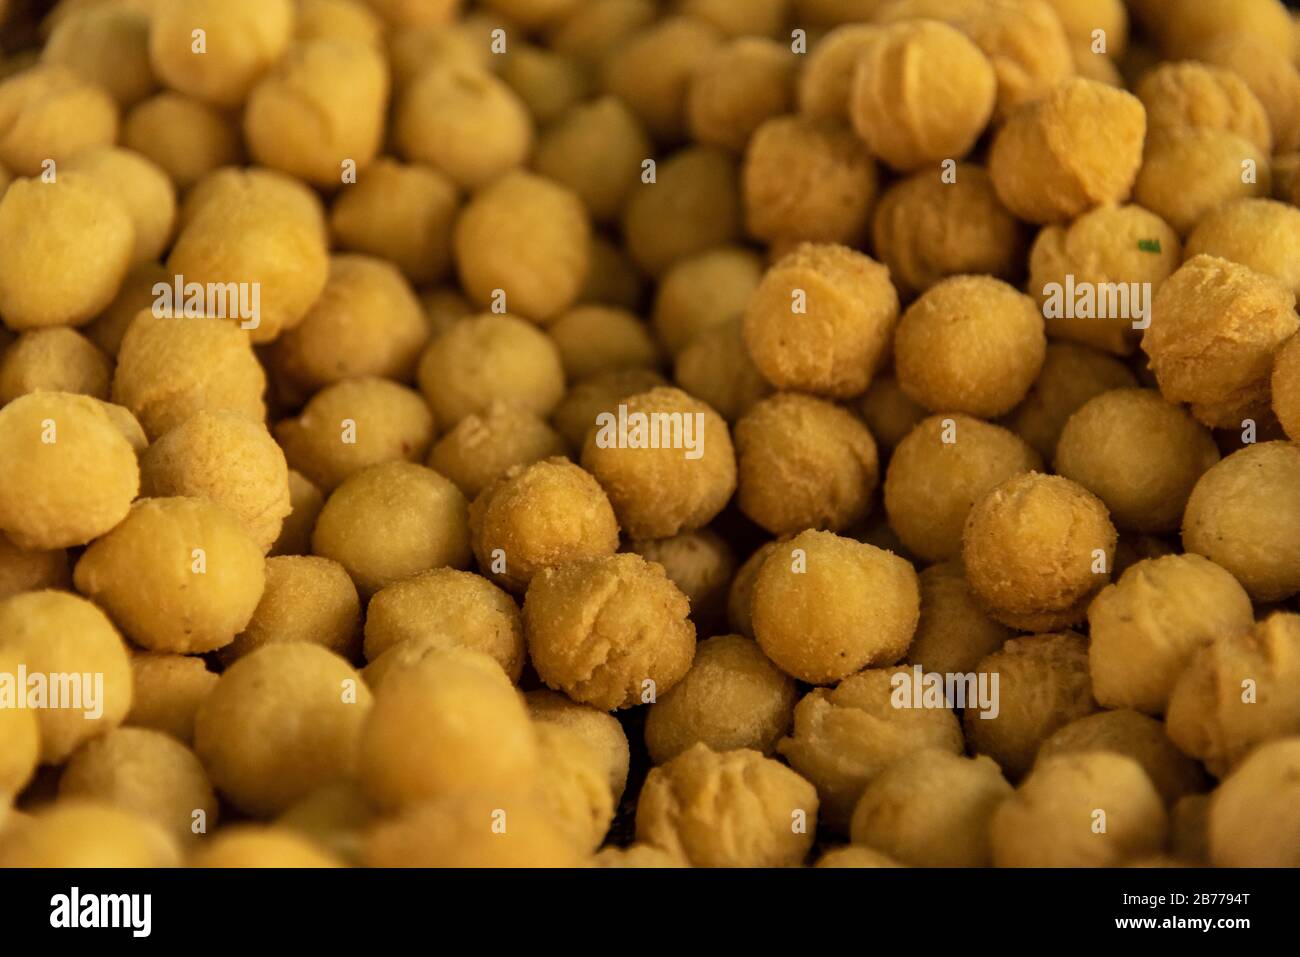 Raw pile of noisette potatoes with shallow depth of field Stock Photo